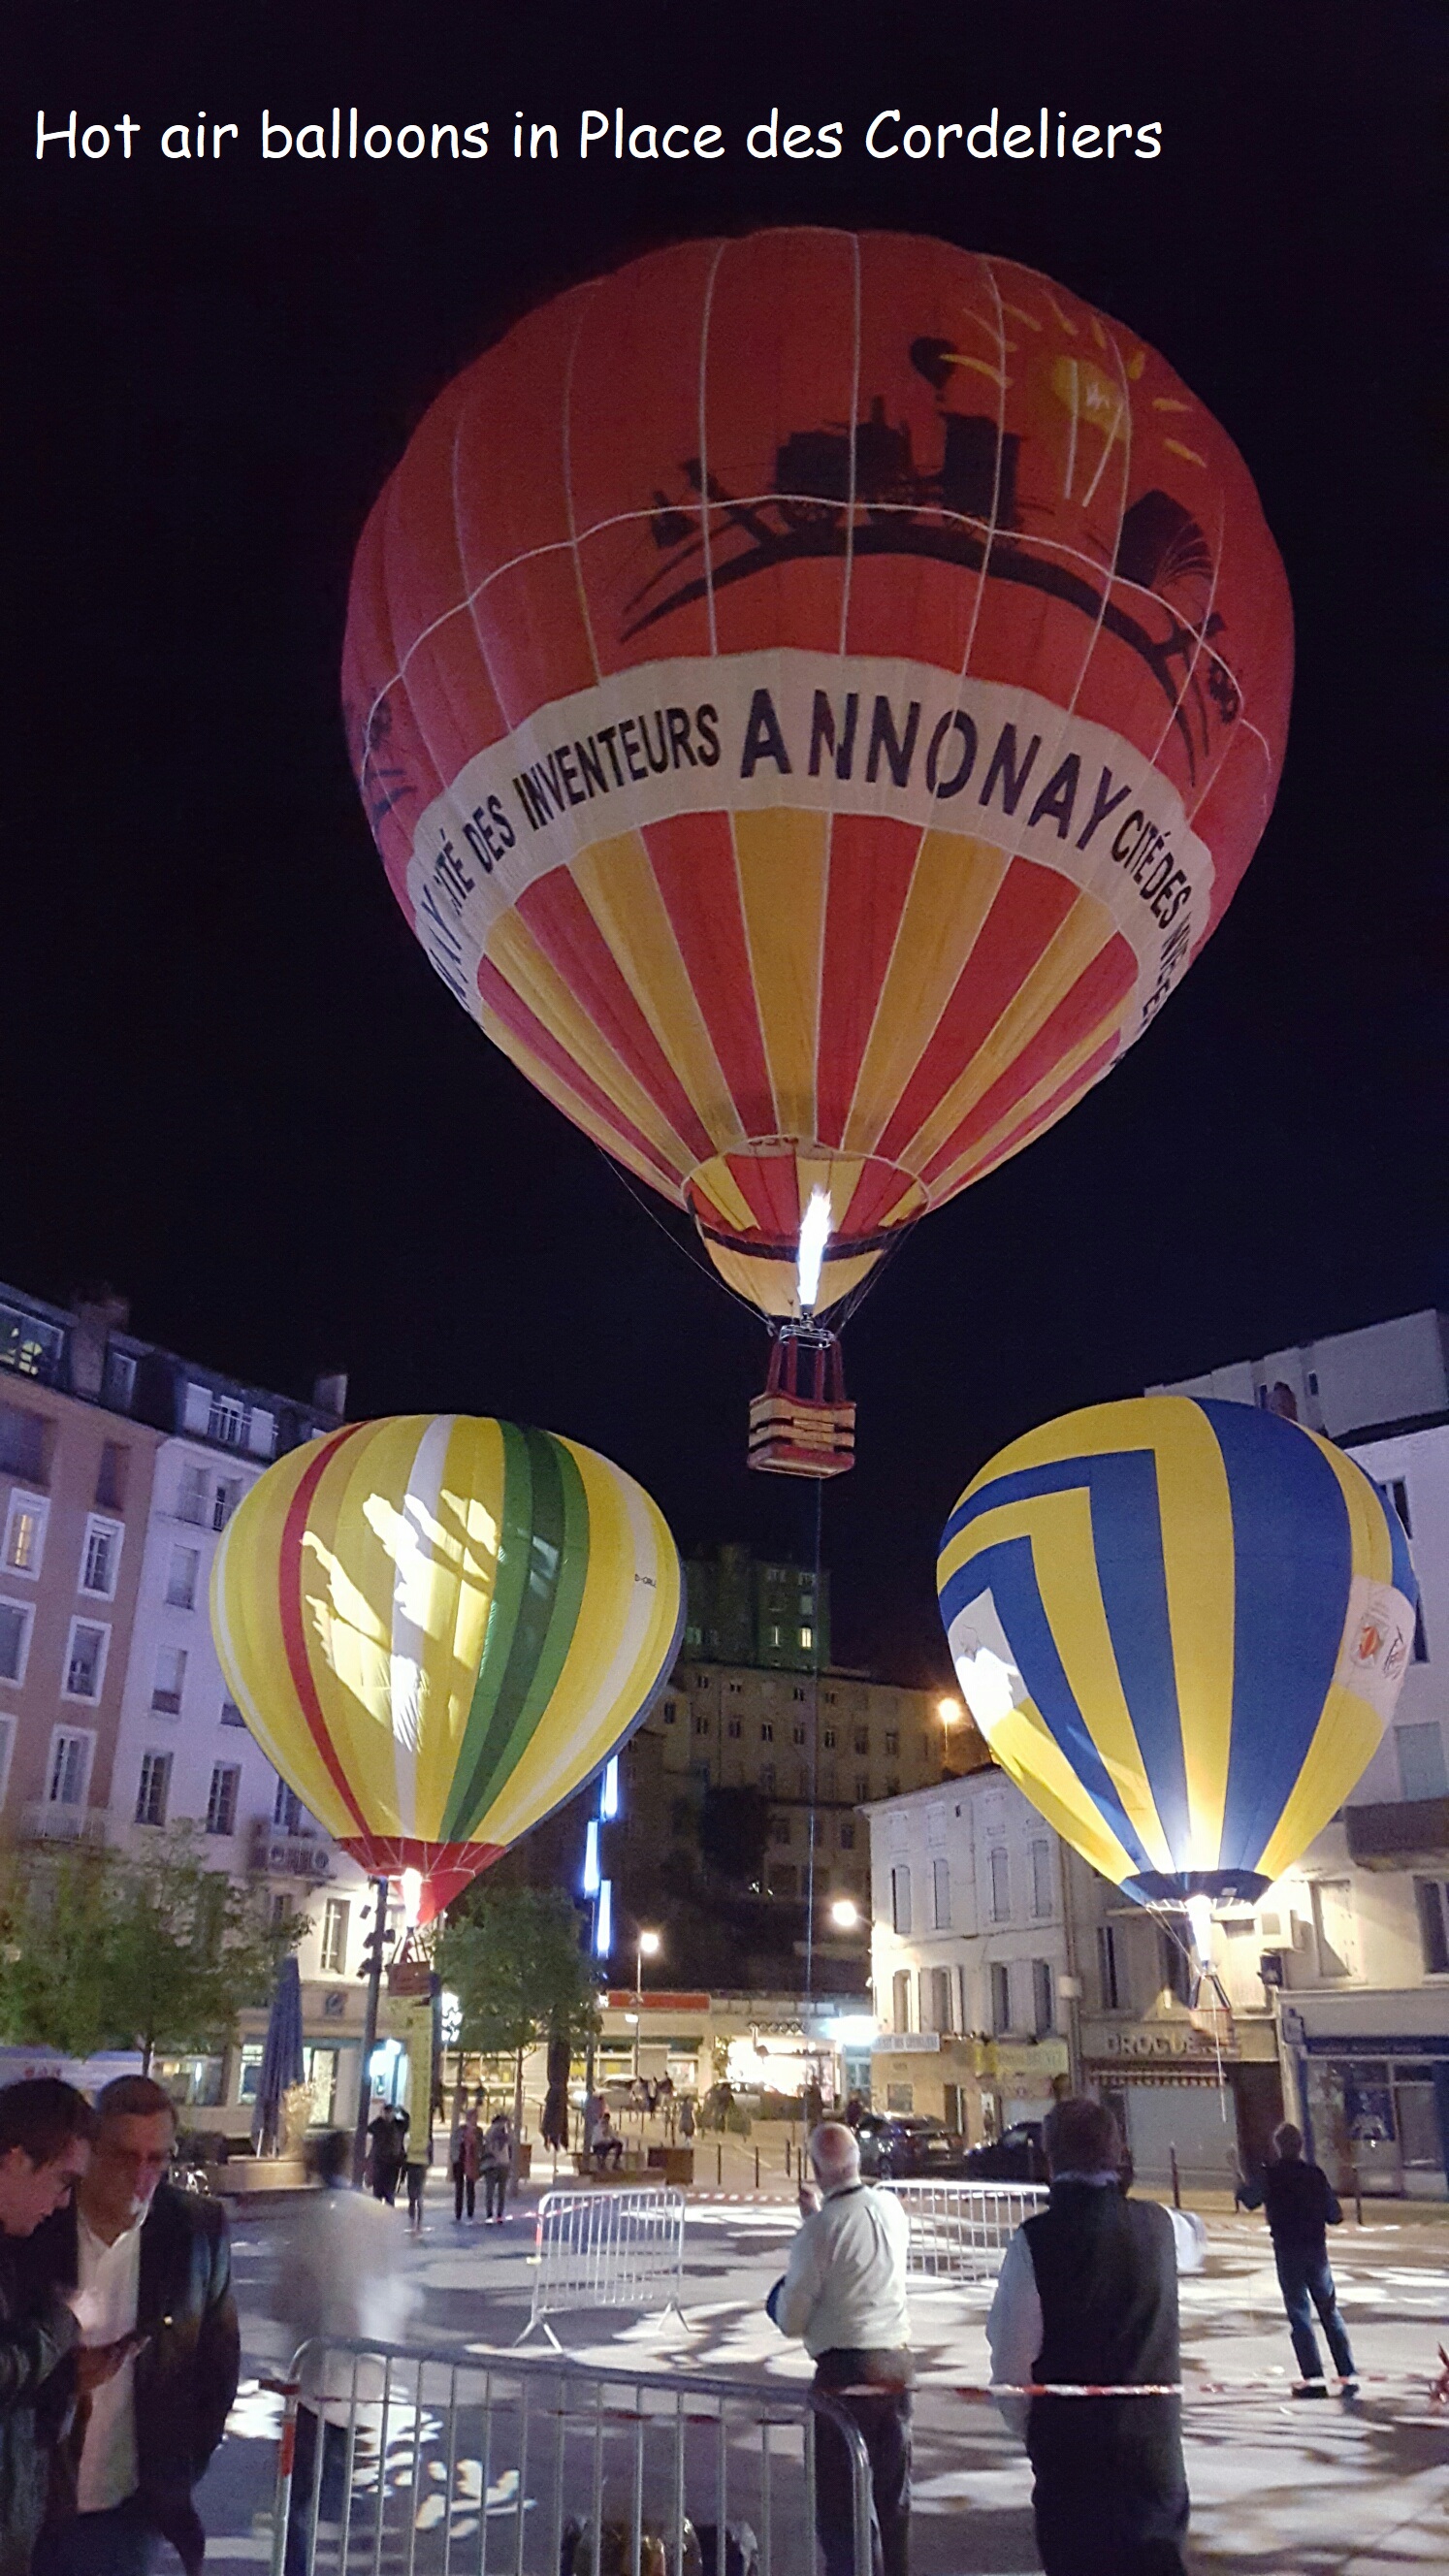 Hot air balloons in Place des Cordeliers.jpg